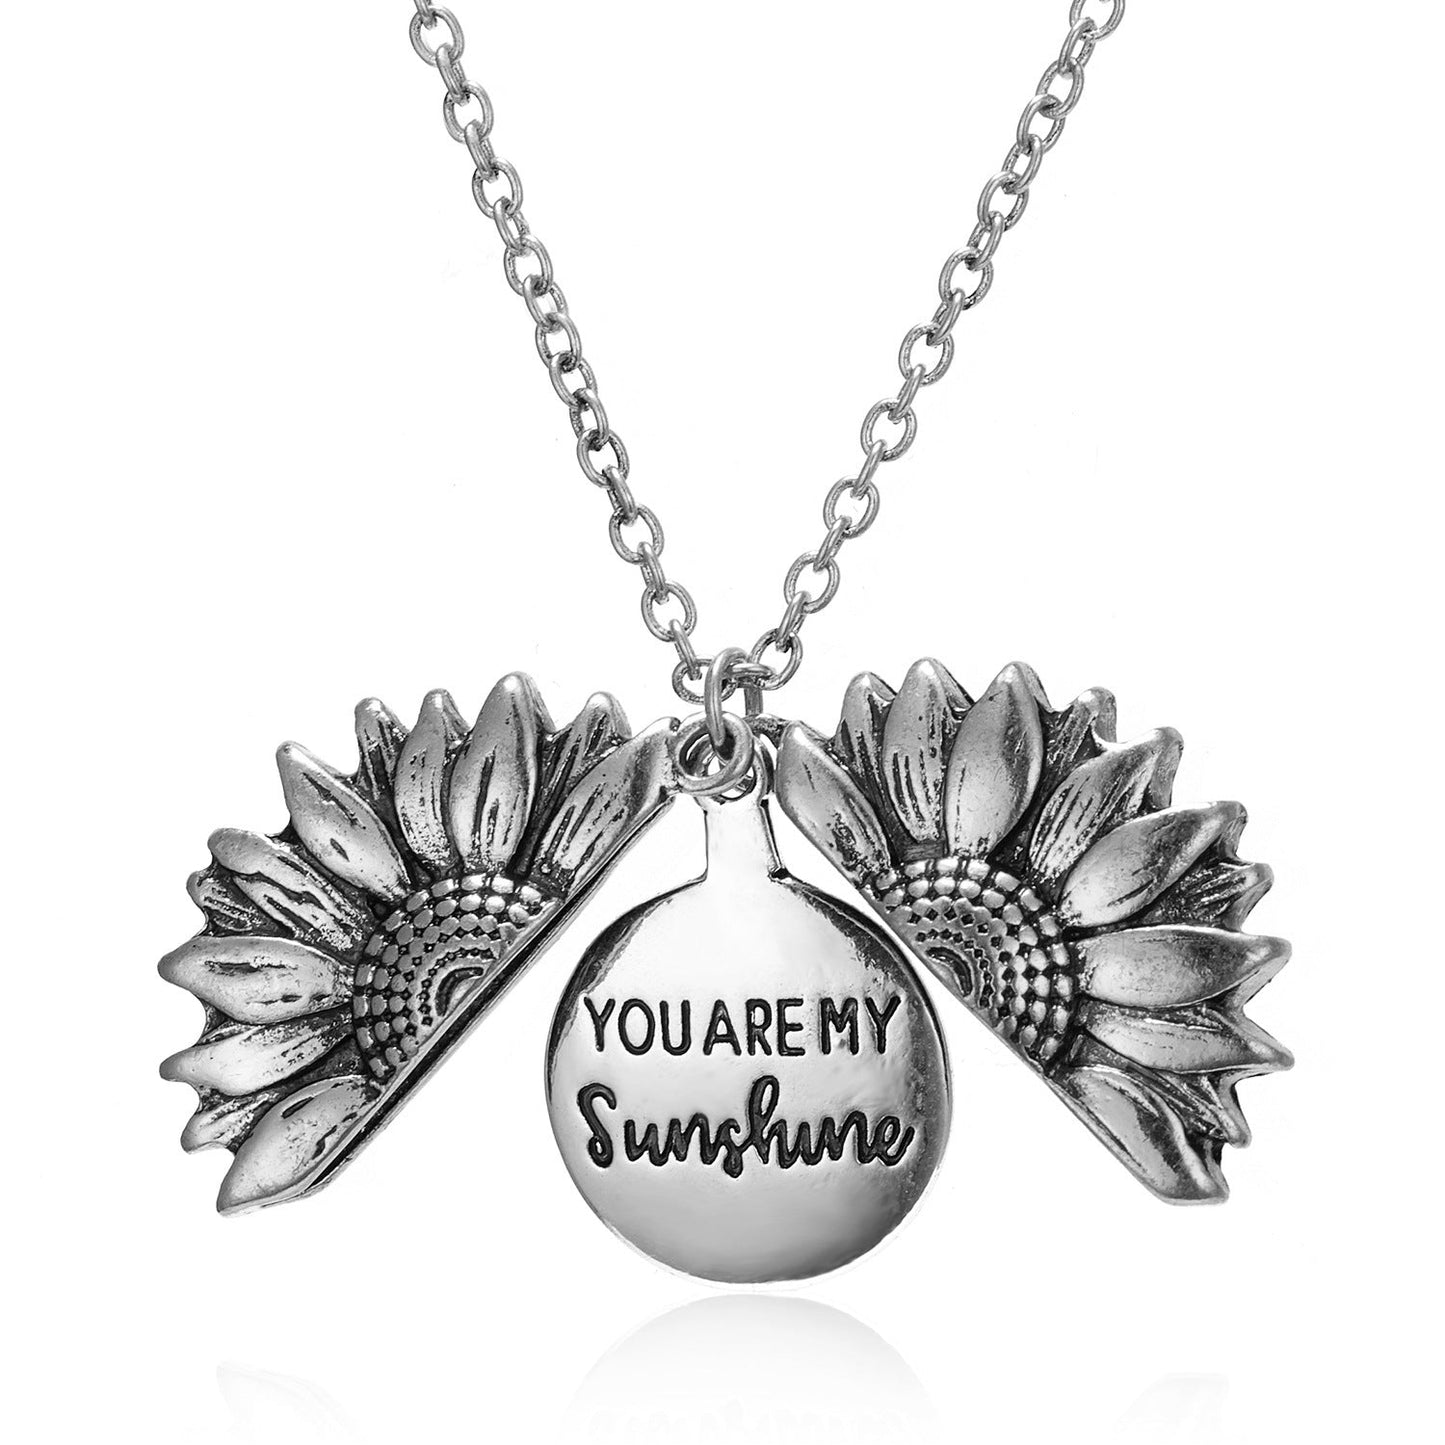 You Are My Sunshine Open Sunflower Necklace in 14K Gold Plating